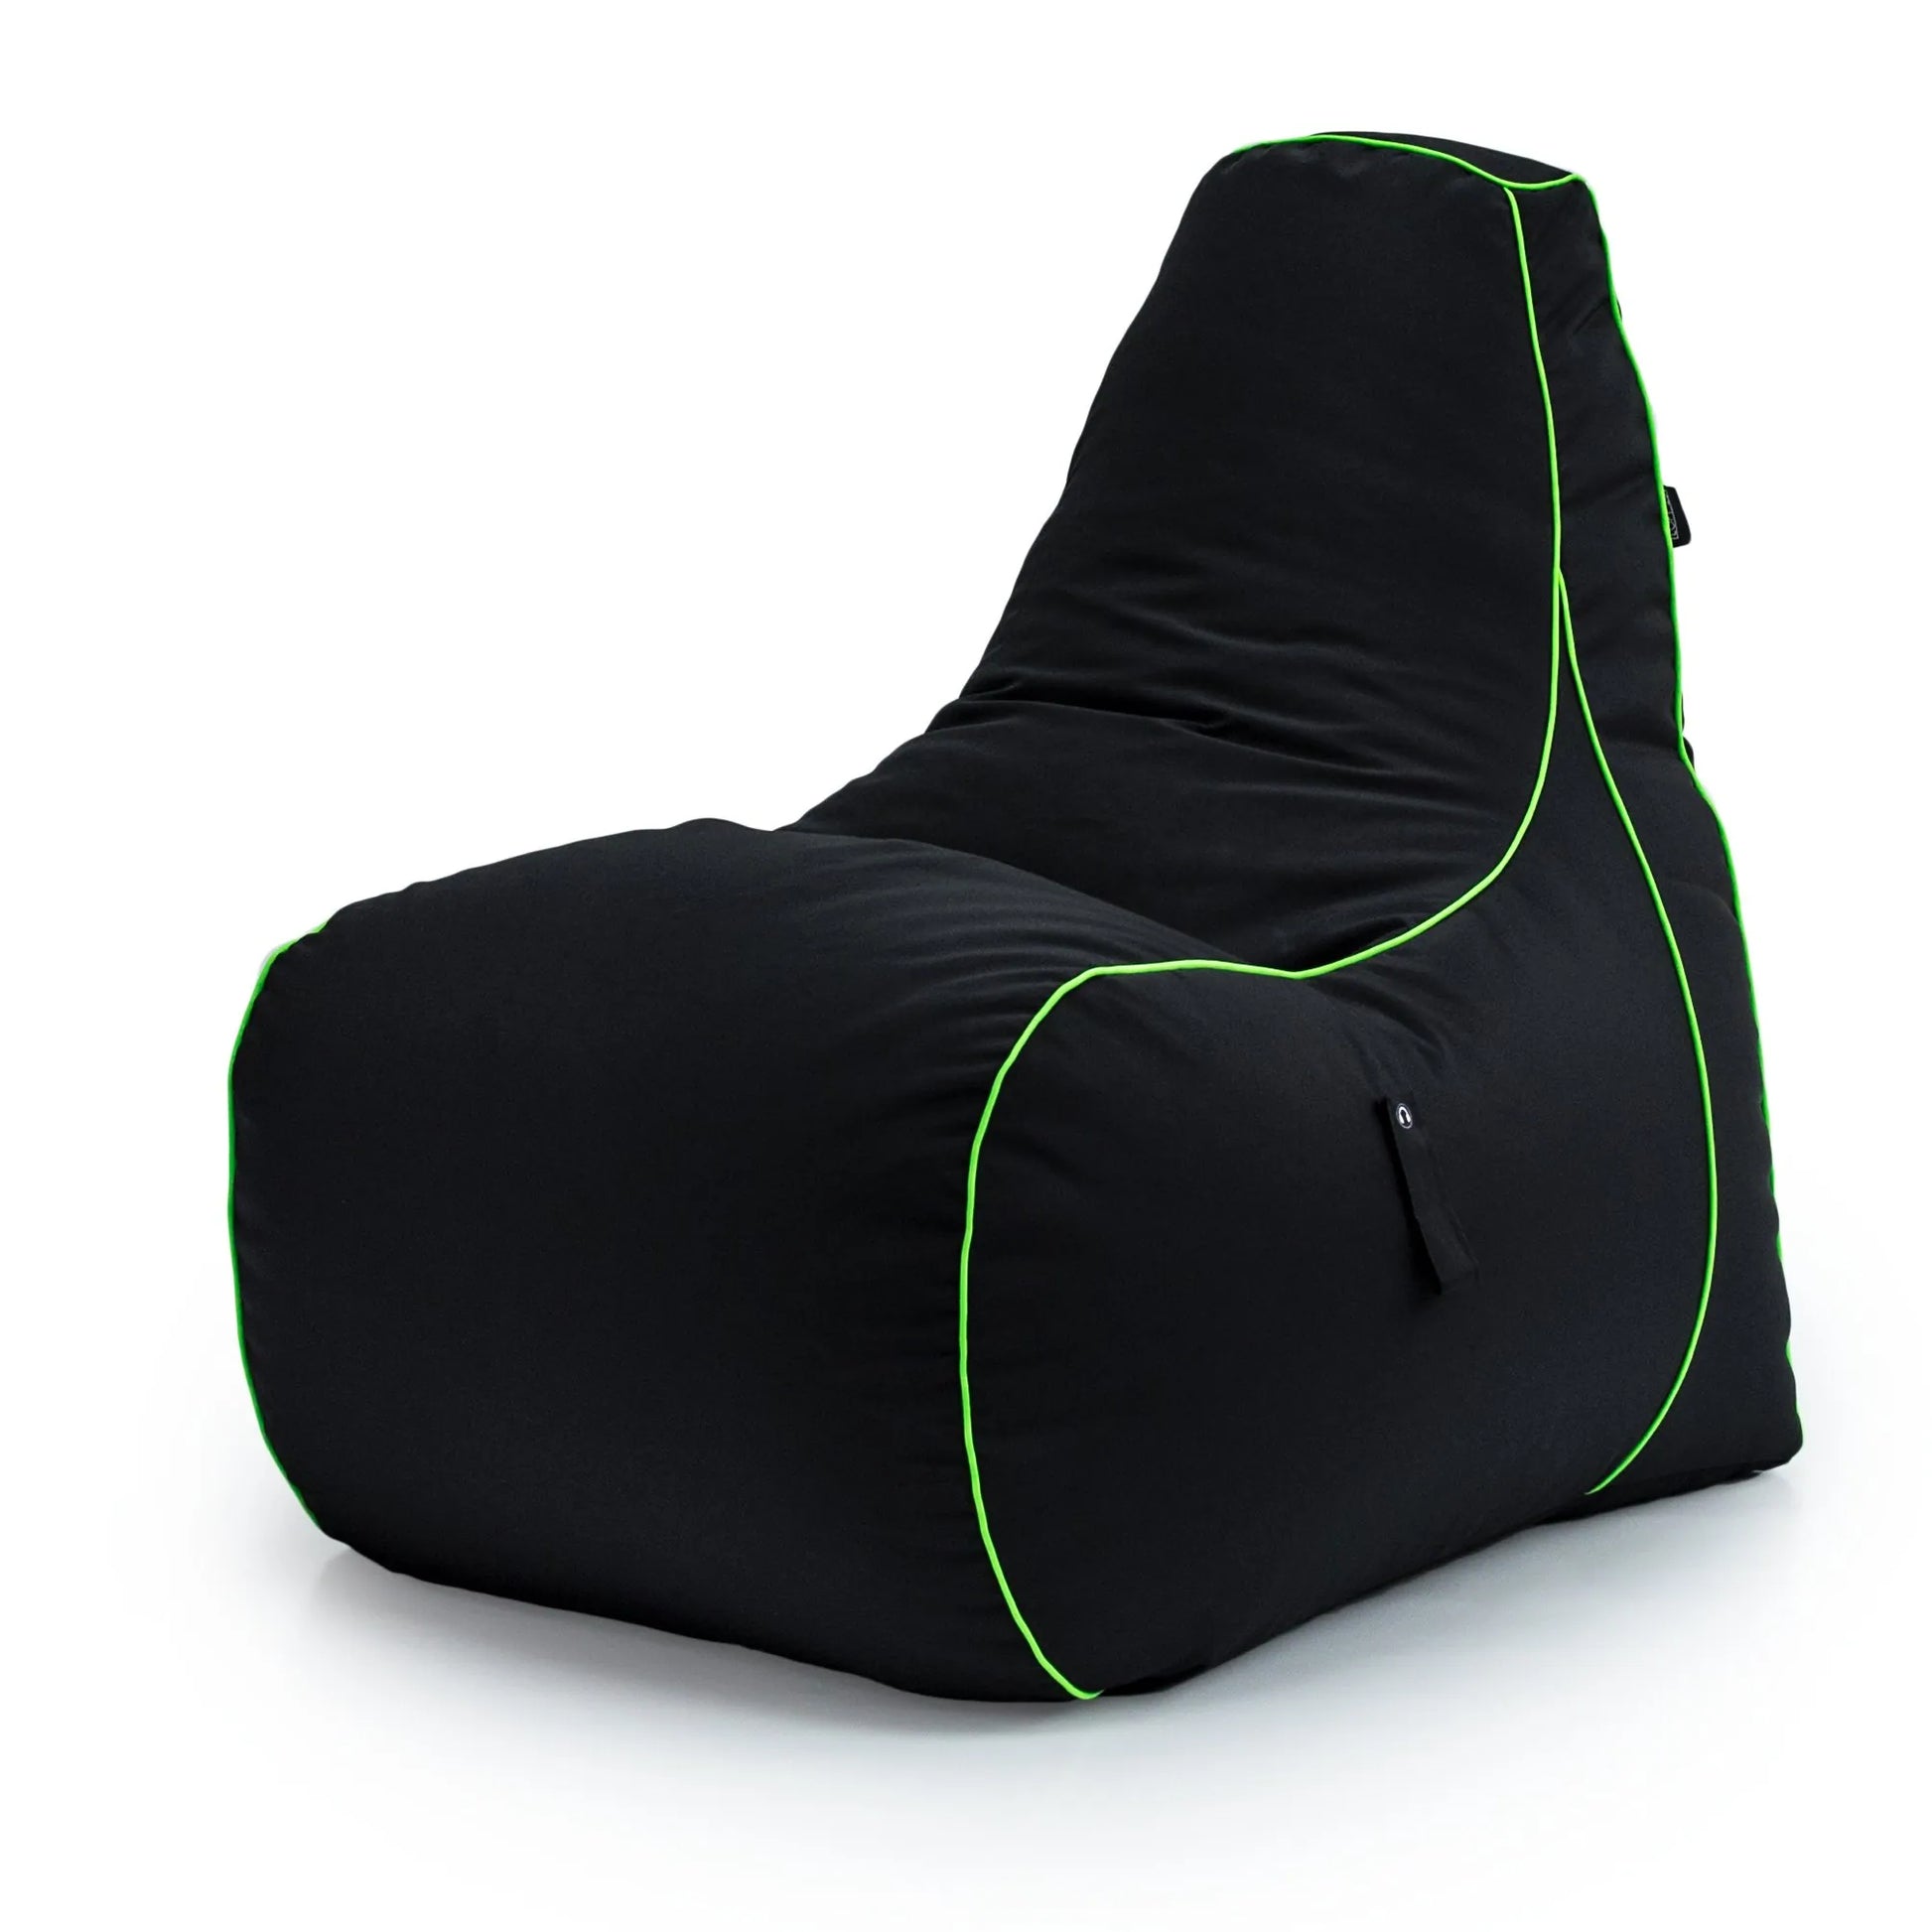 Black bean bag cover with neon green trim on a white background.